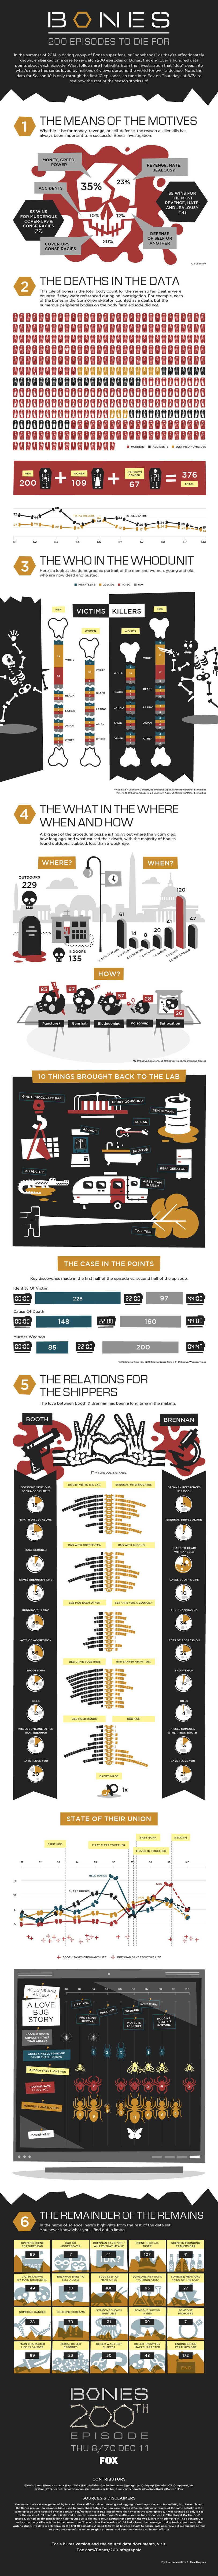 Fan-made 'Bones' infographic gives by-the-numbers breakdown of the show